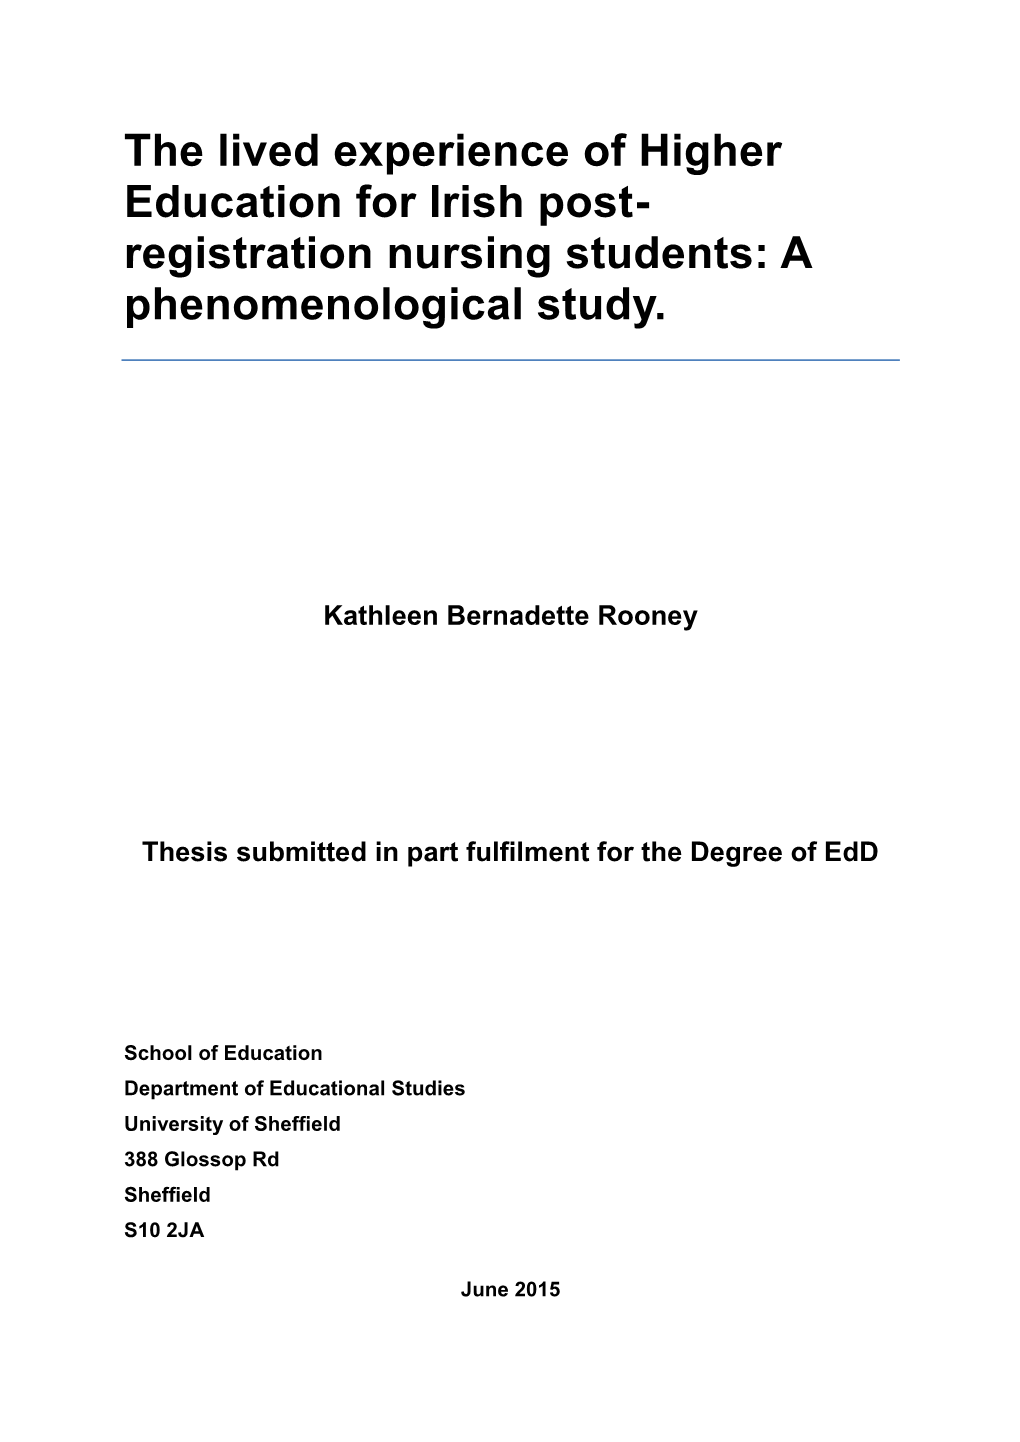 The Lived Experience of Higher Education for Irish Post- Registration Nursing Students: a Phenomenological Study